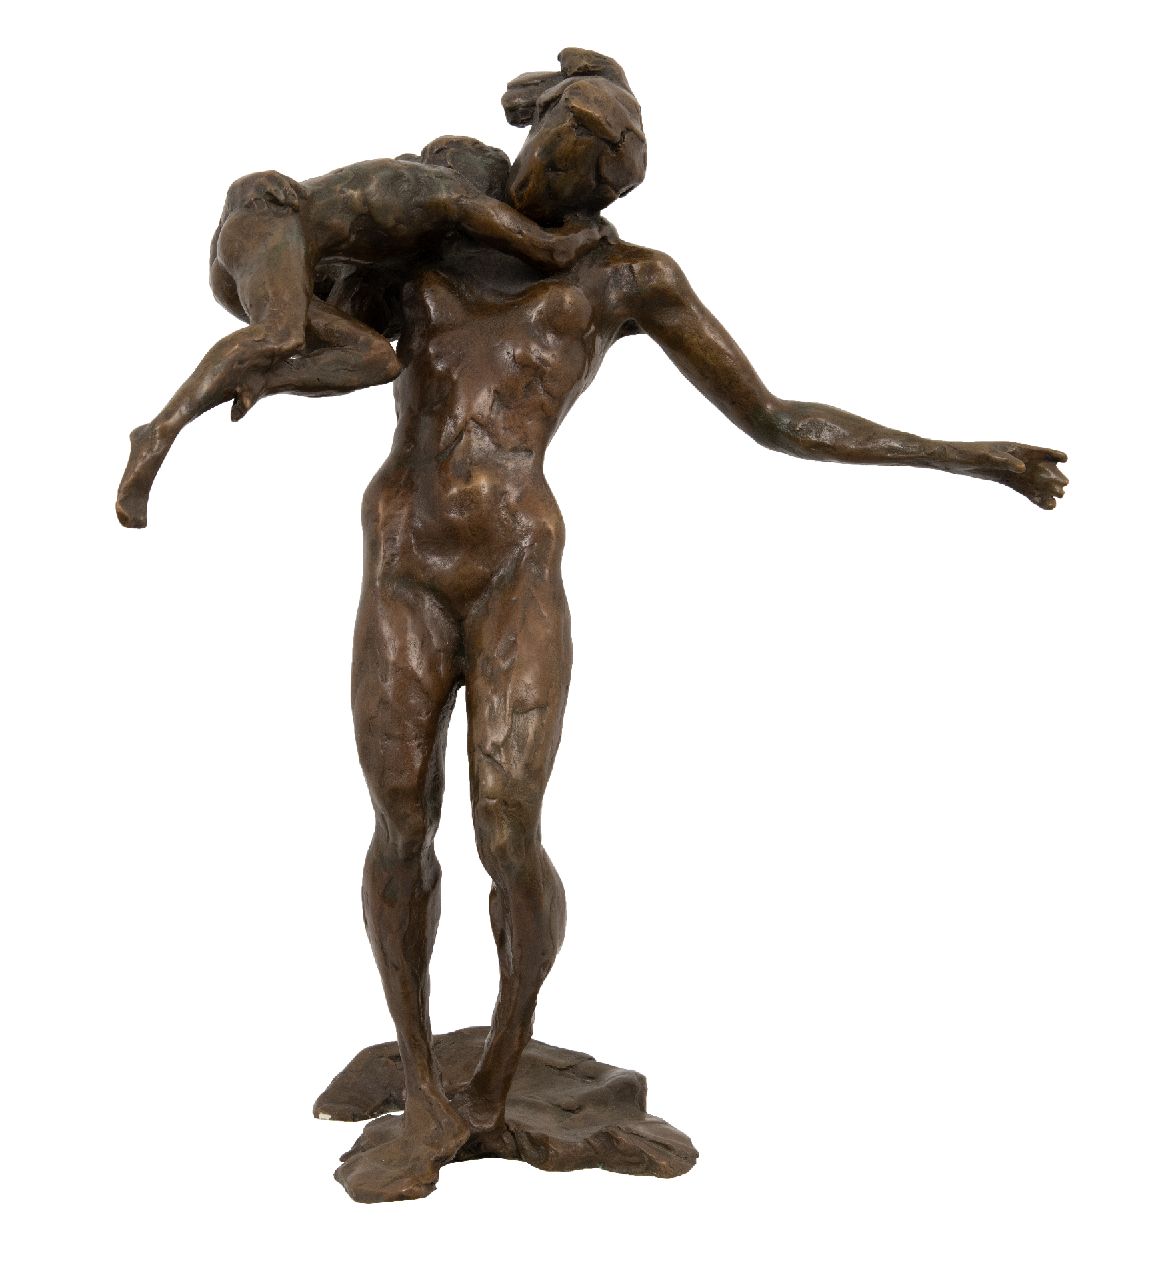 Verkade K.  | Korstiaan 'Kees' Verkade | Sculptures and objects offered for sale | L'Elan (mother and child), bronze 38.0 cm, signed on the base and dated '96